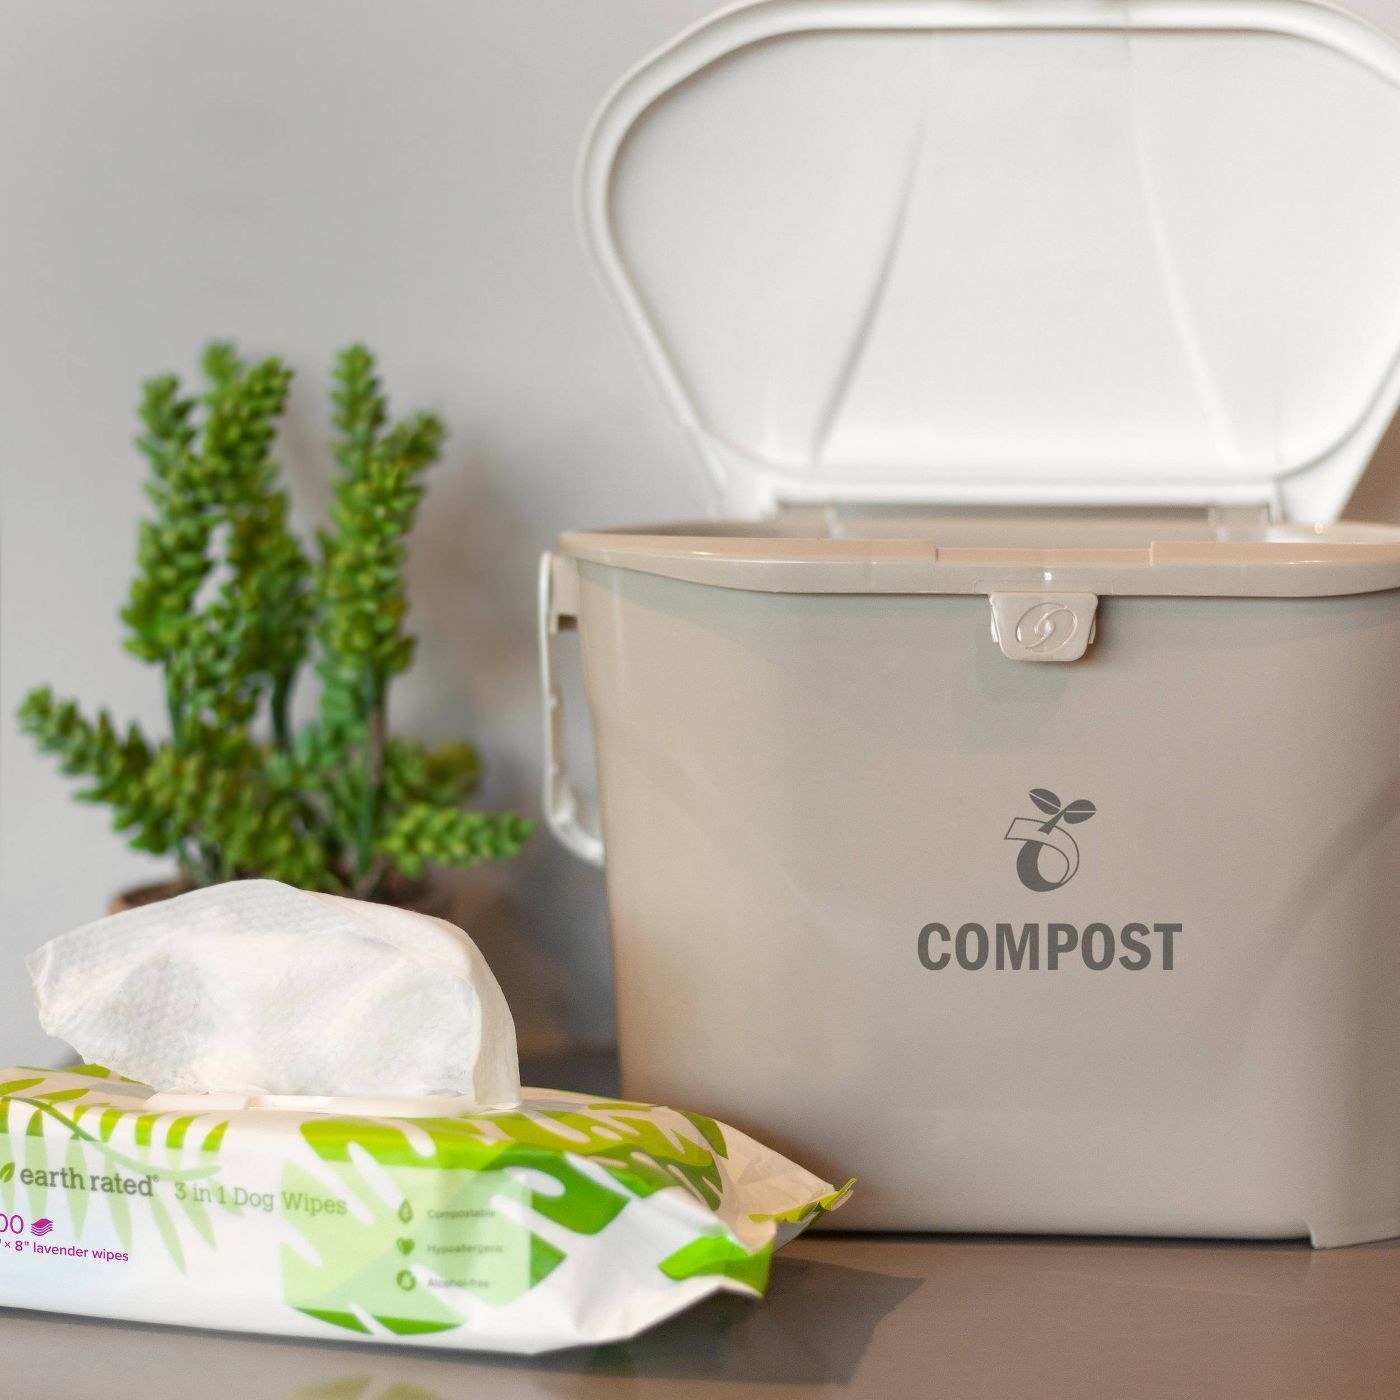 pack of compostable pet wipes next to a compost bin